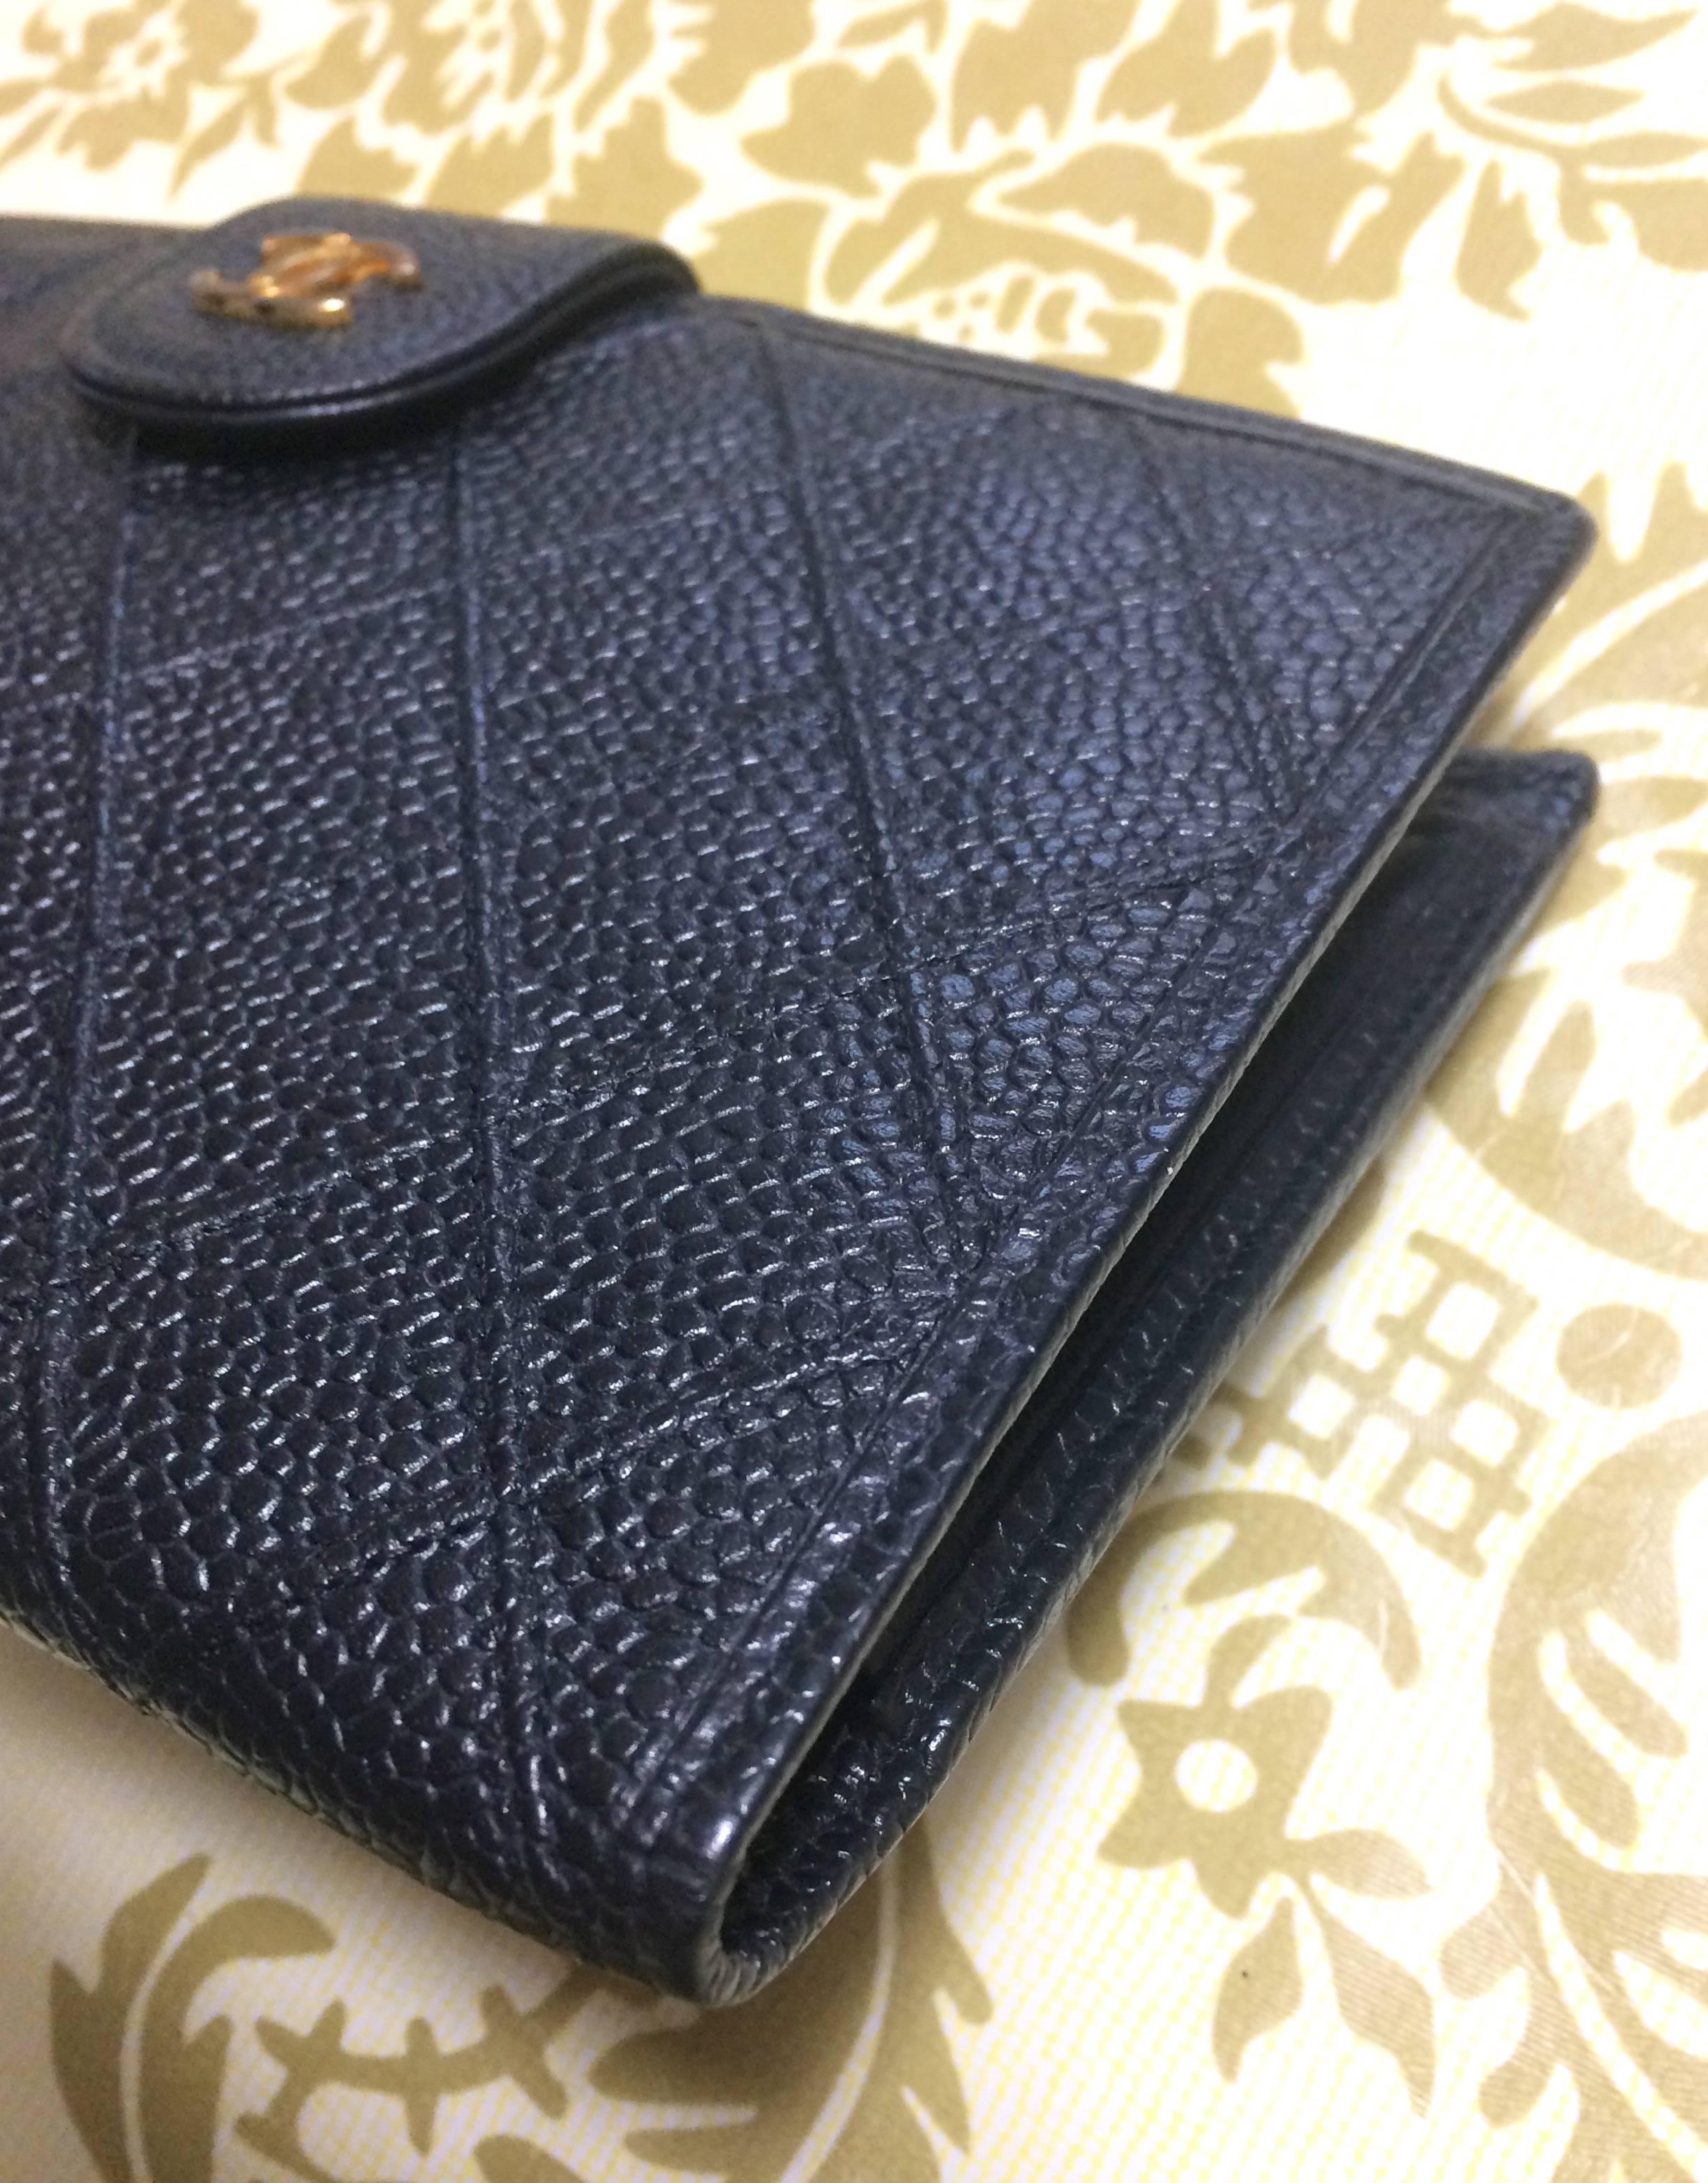 Women's or Men's Vintage CHANEL black caviar leather wallet with stitches and gold tone CC motif.